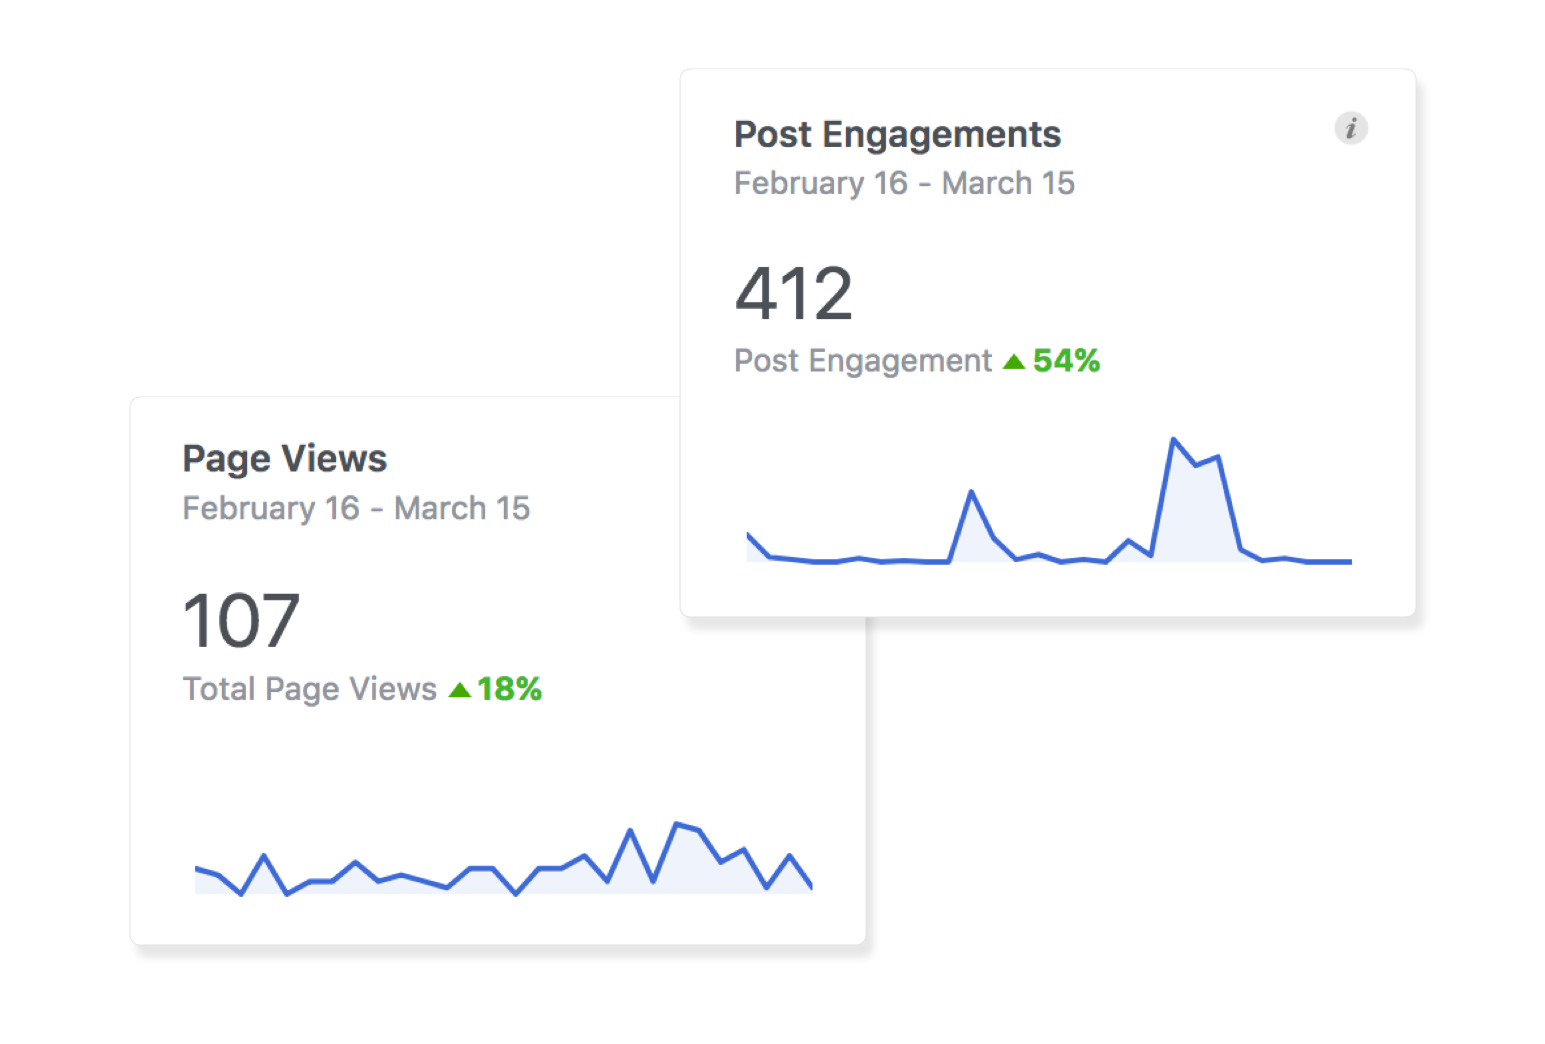 page-views-post-engagements